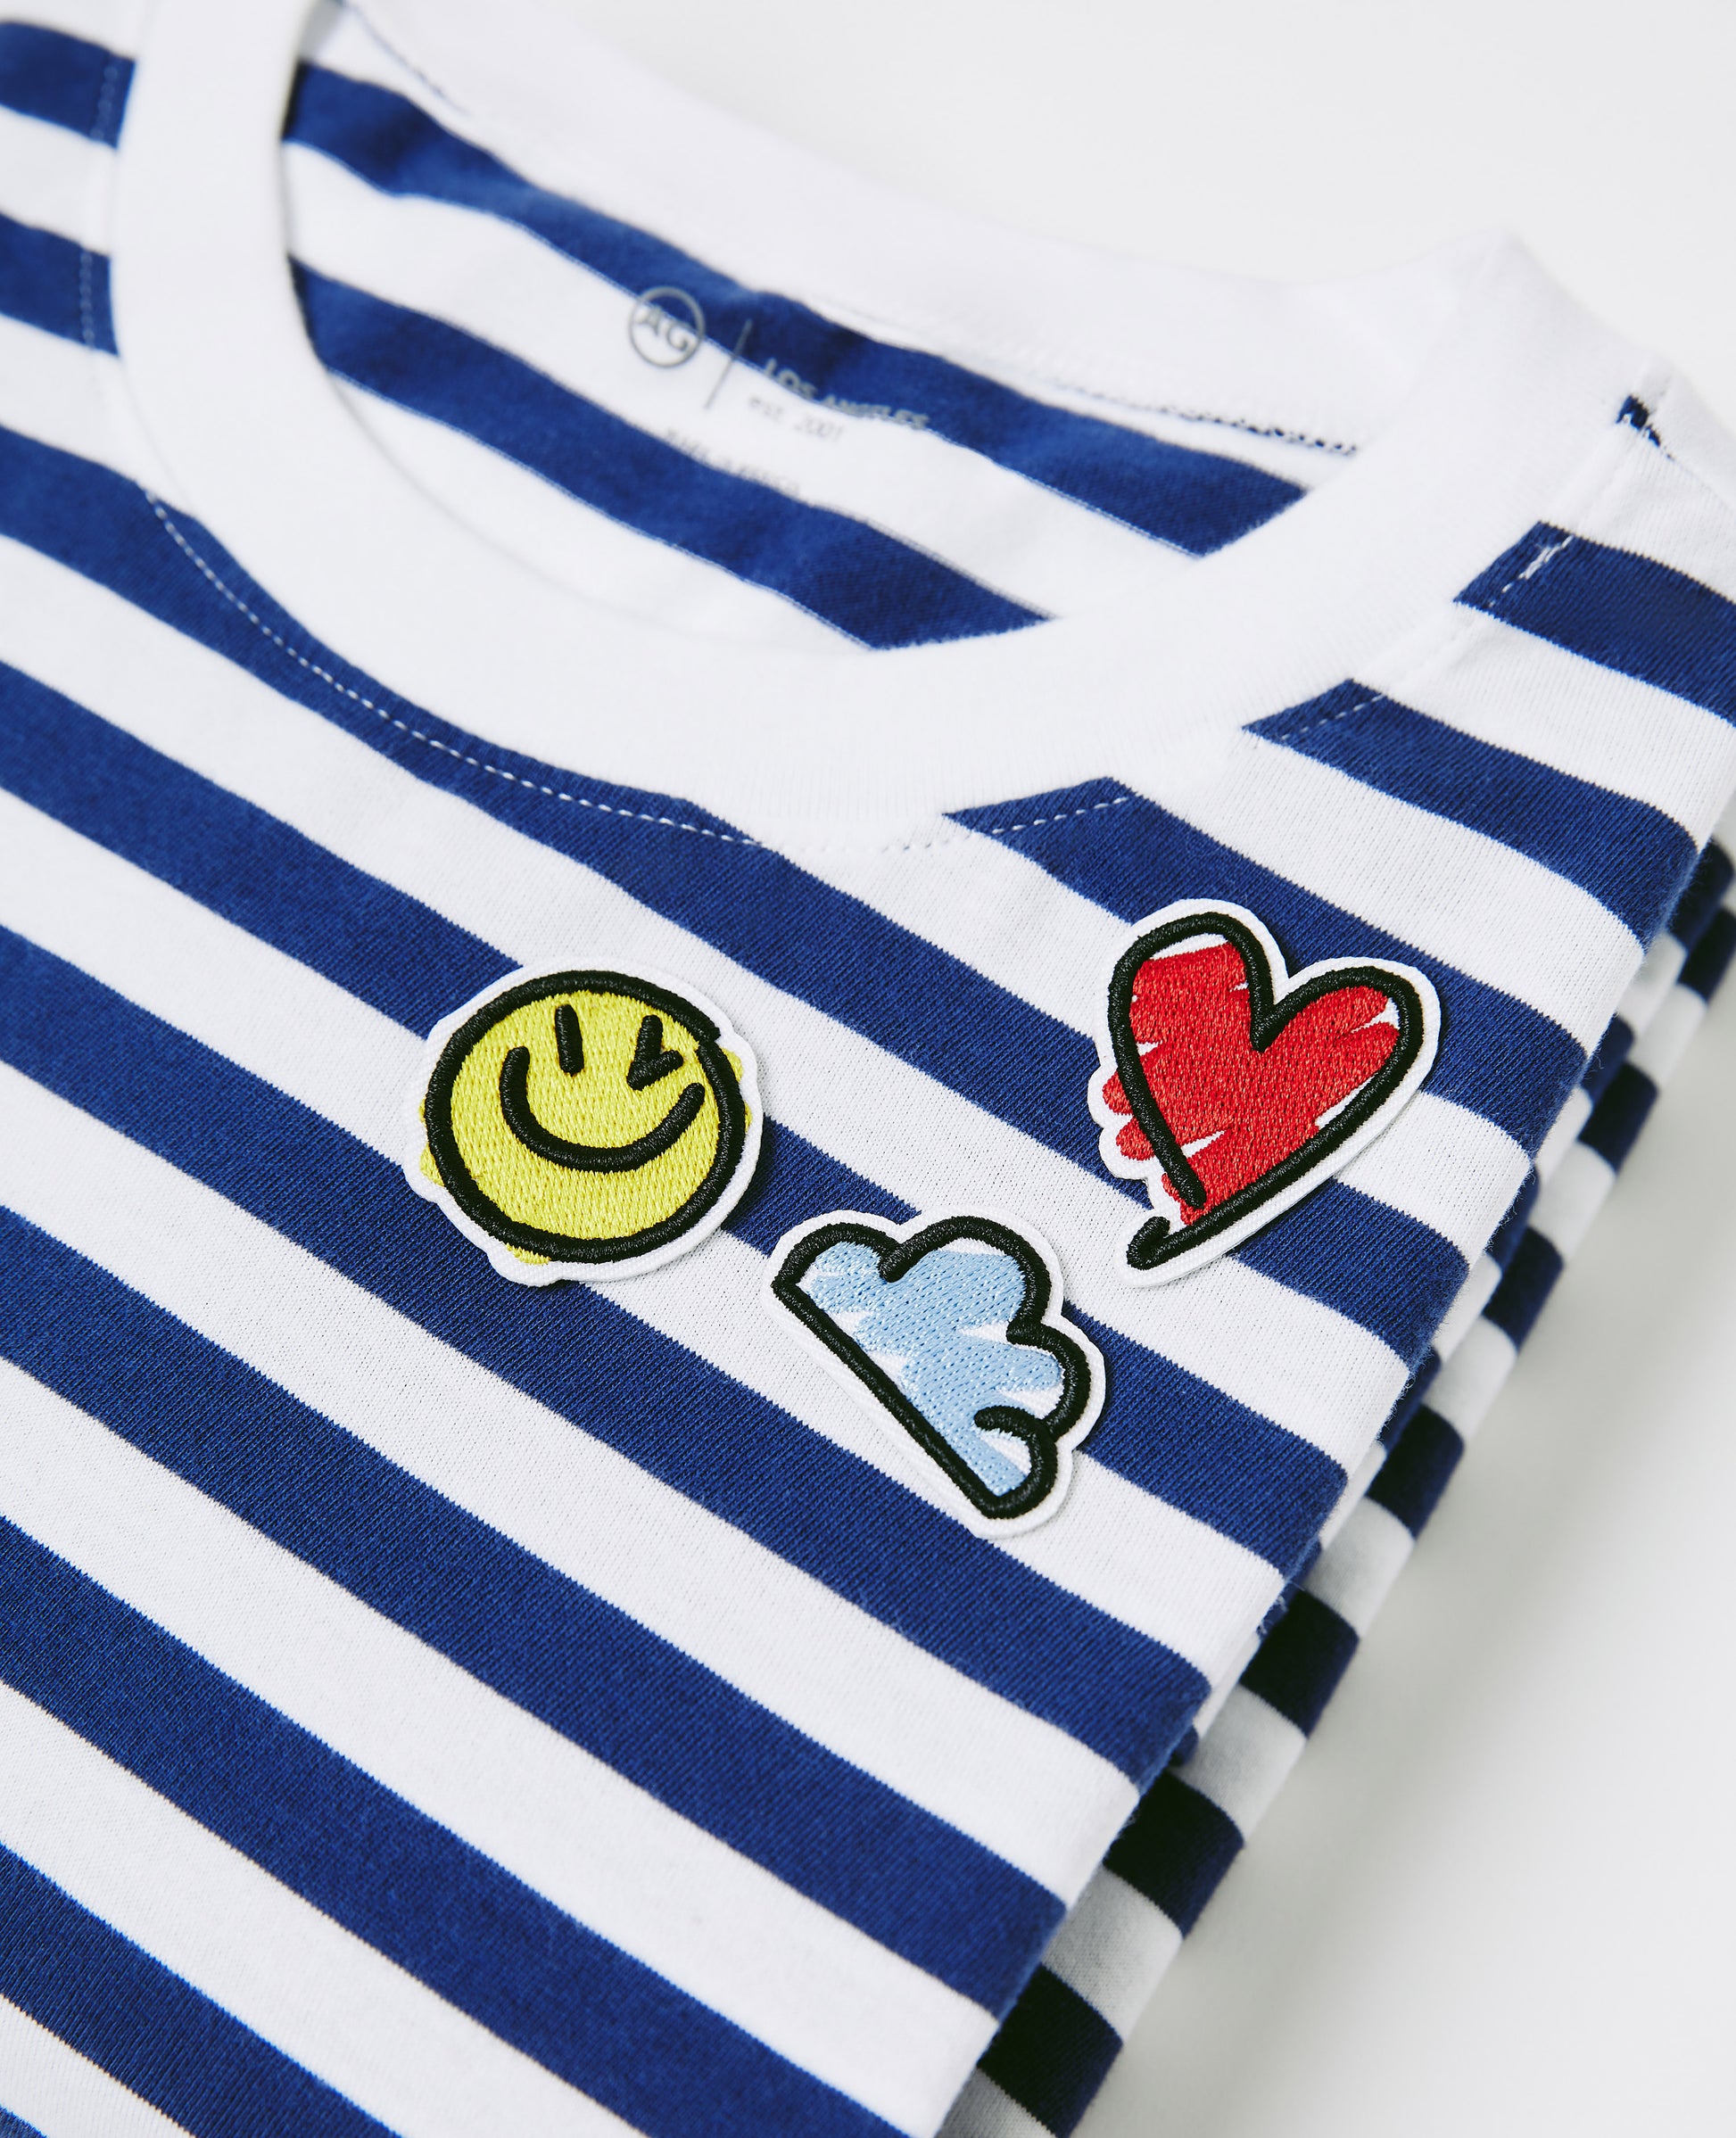 AG Patches All The Feels Accessory Photo 8